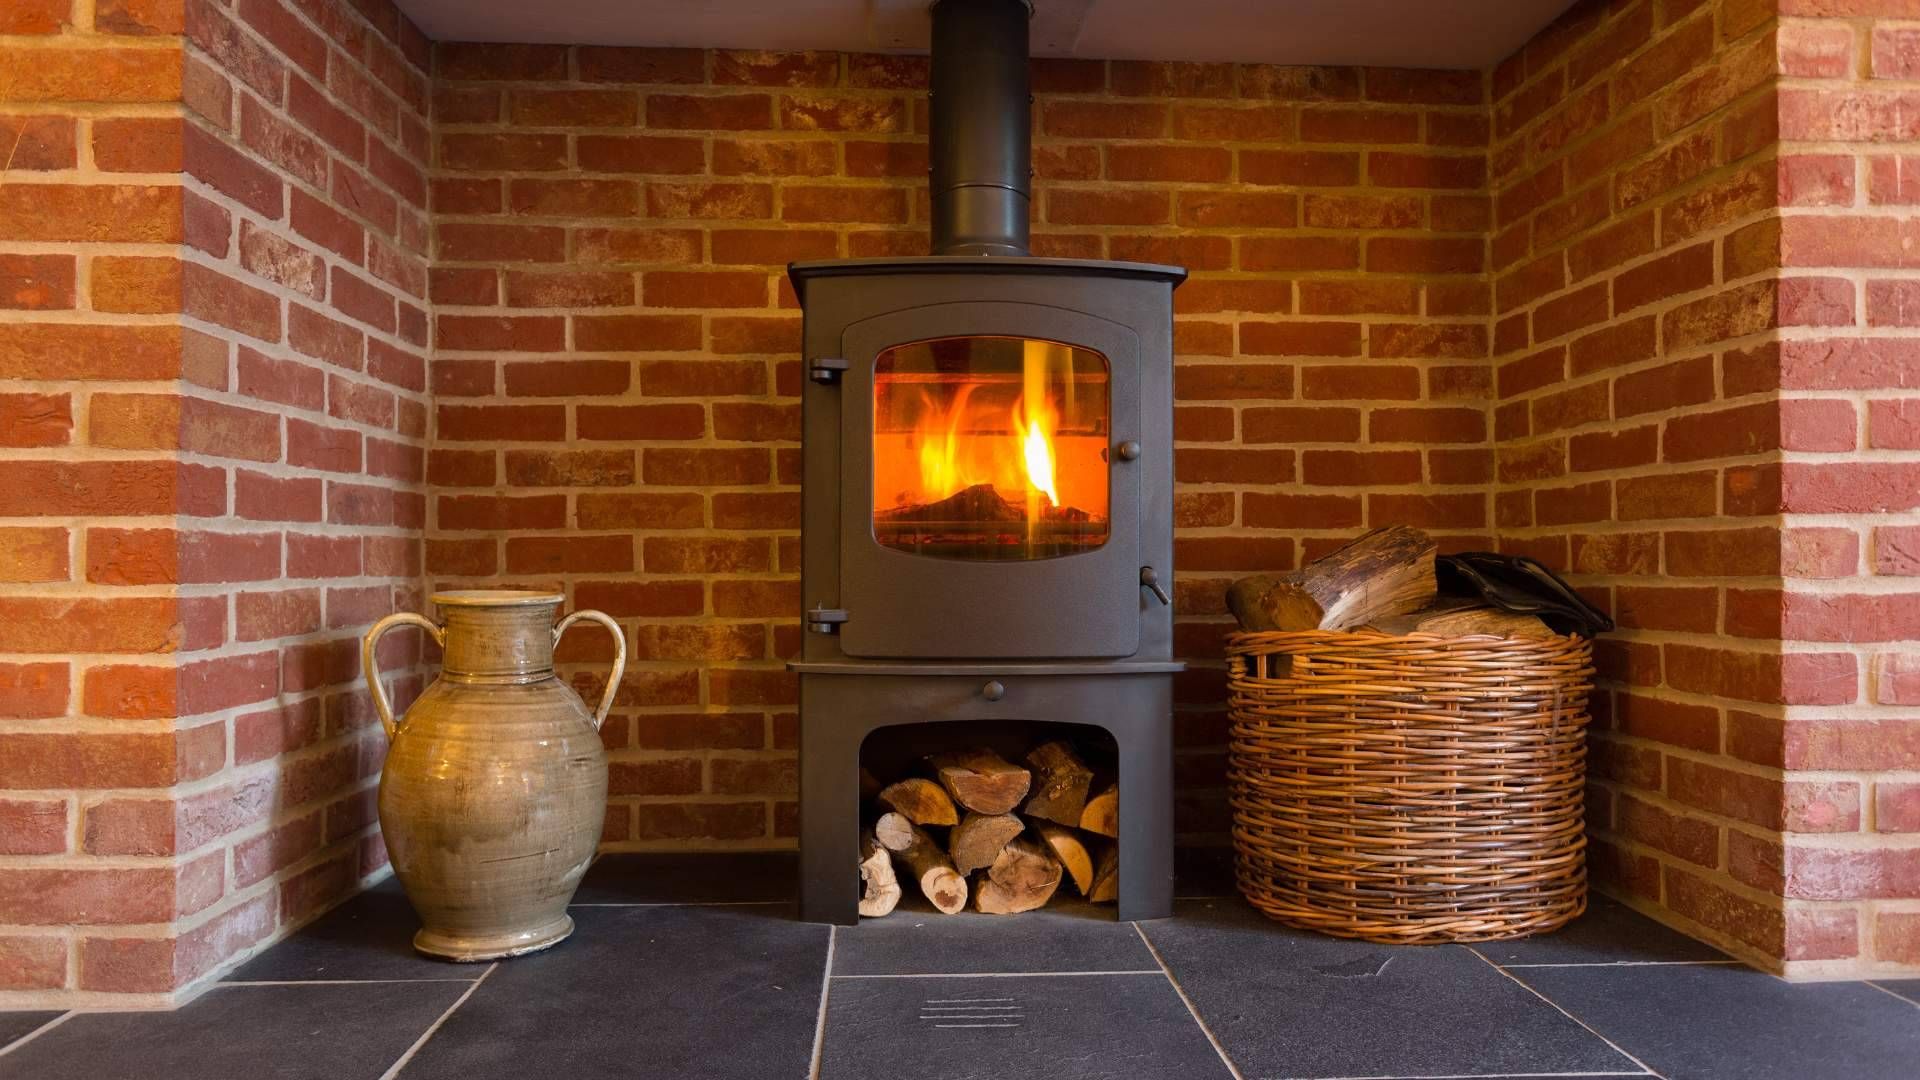 Will wood burning stoves become a property pariah?